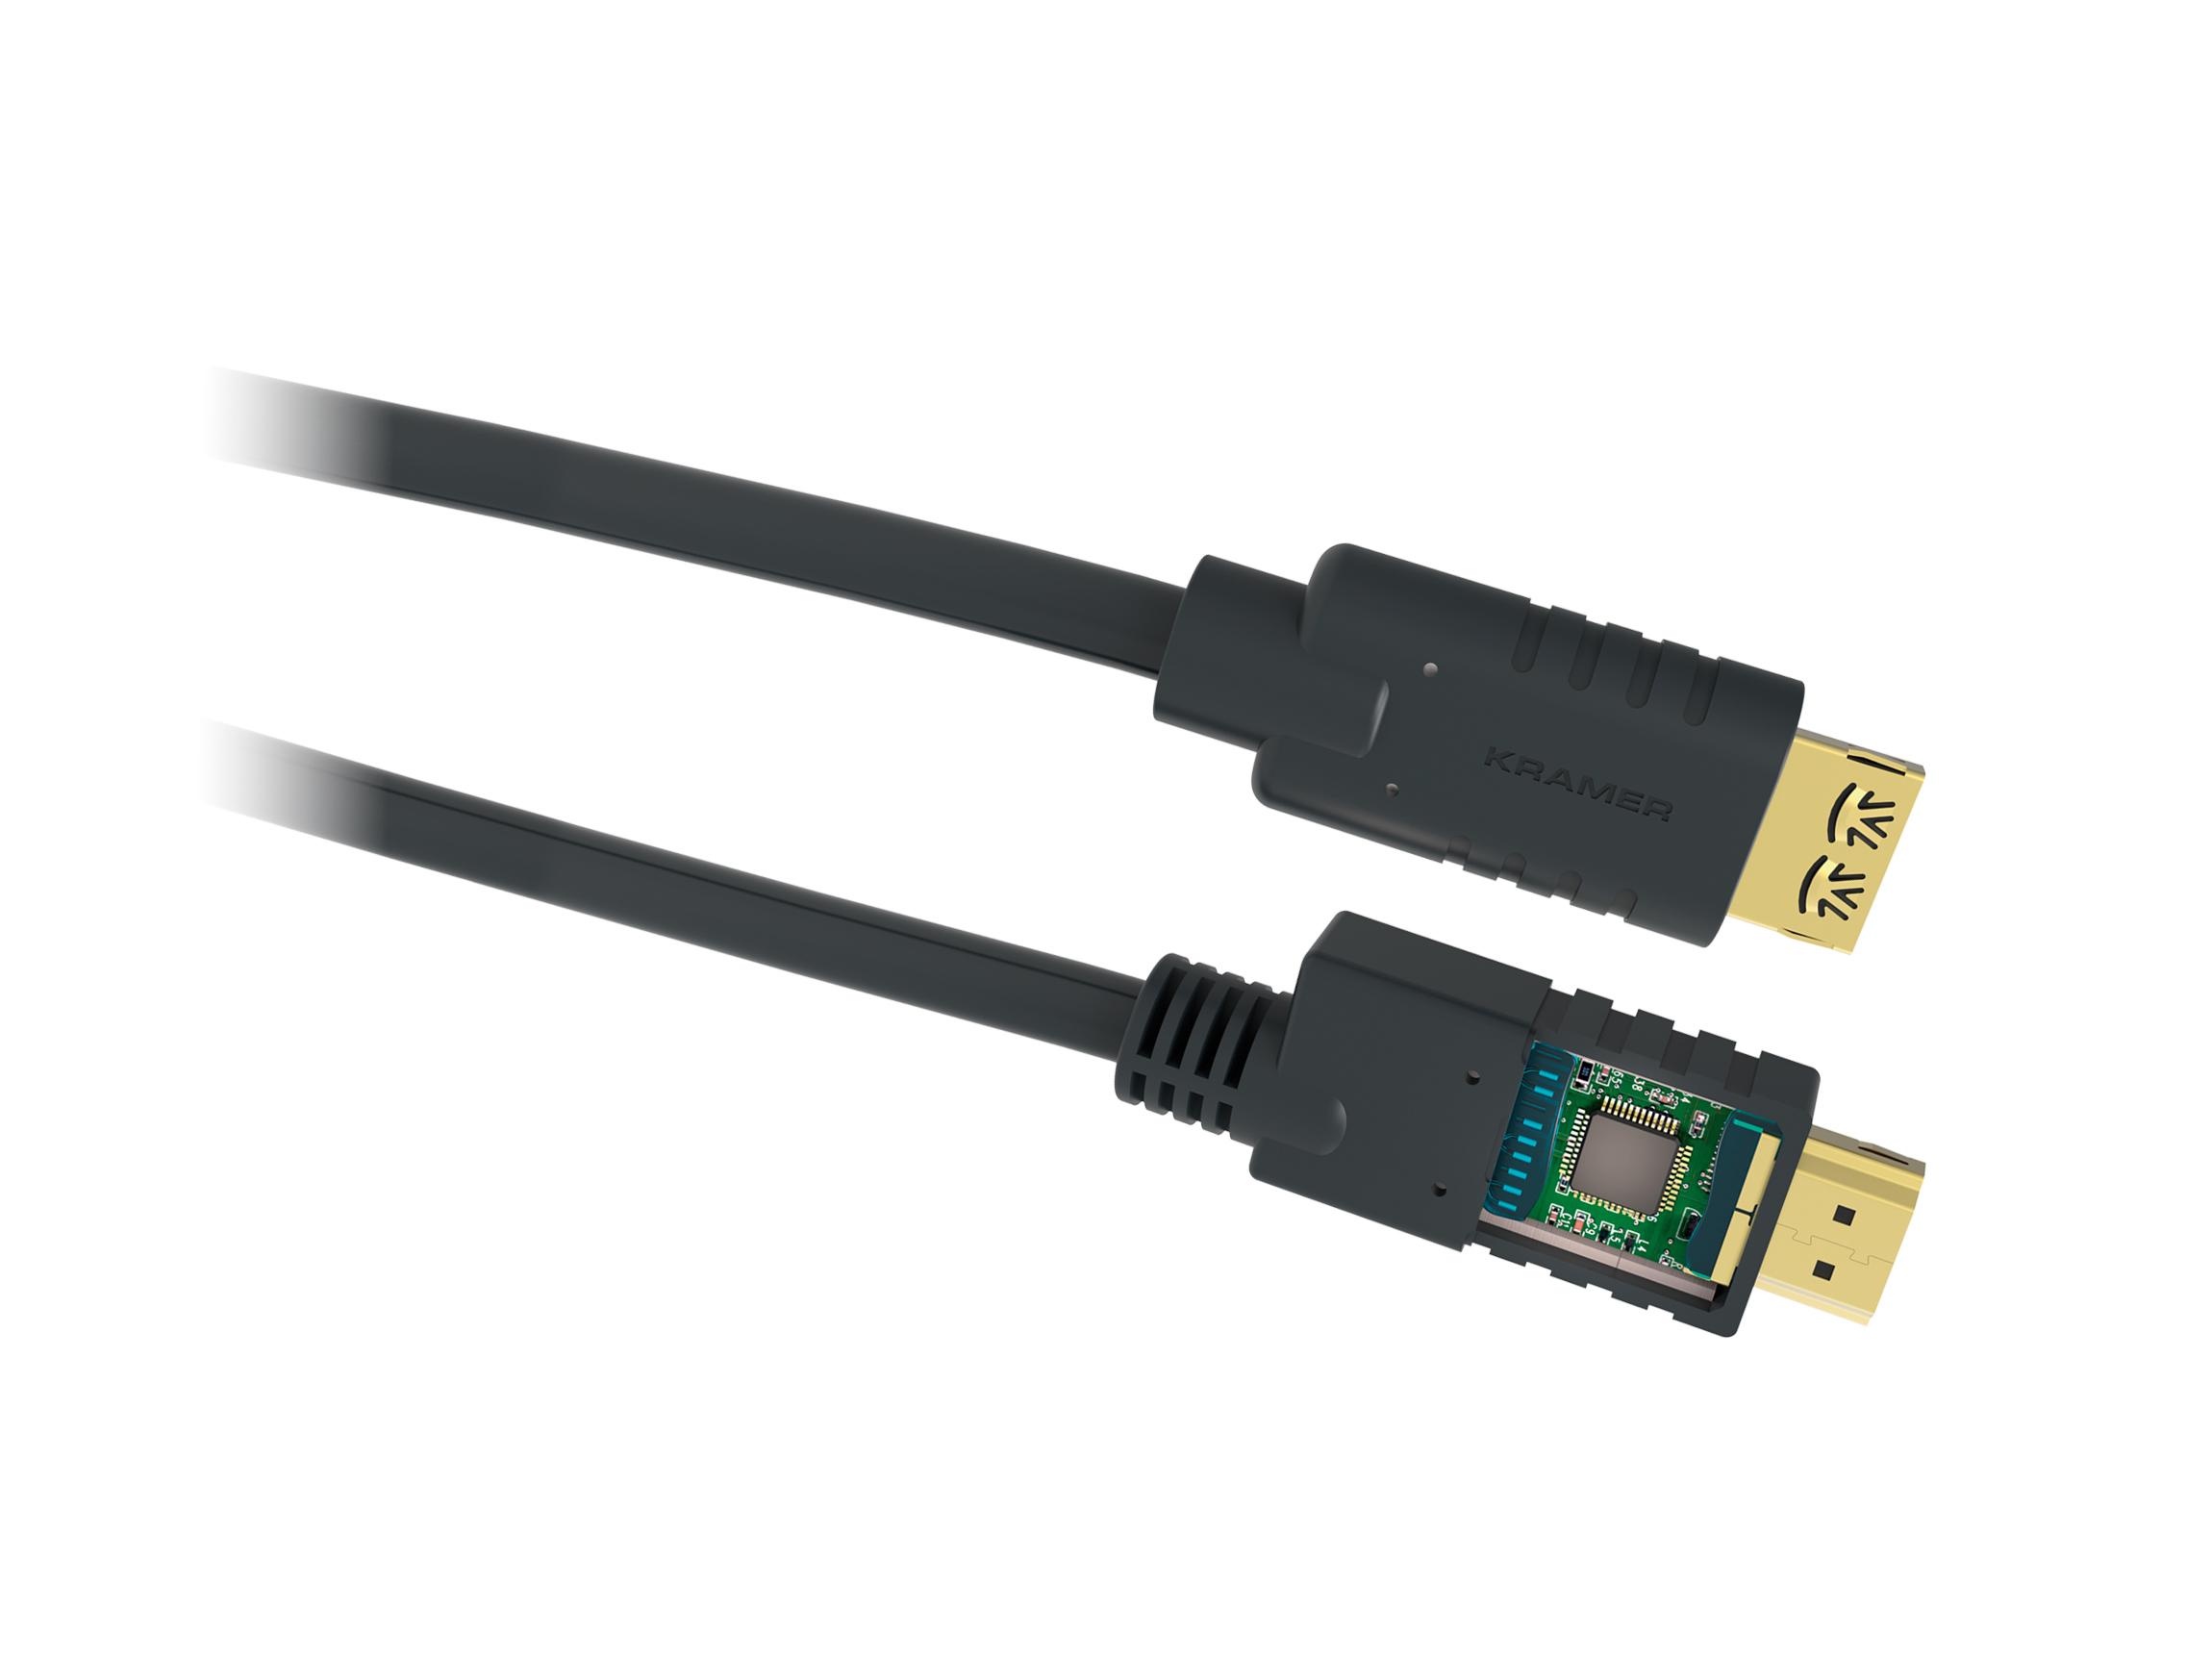 CA-HM-82 Active High Speed HDMI Cable with Ethernet - 82ft by Kramer